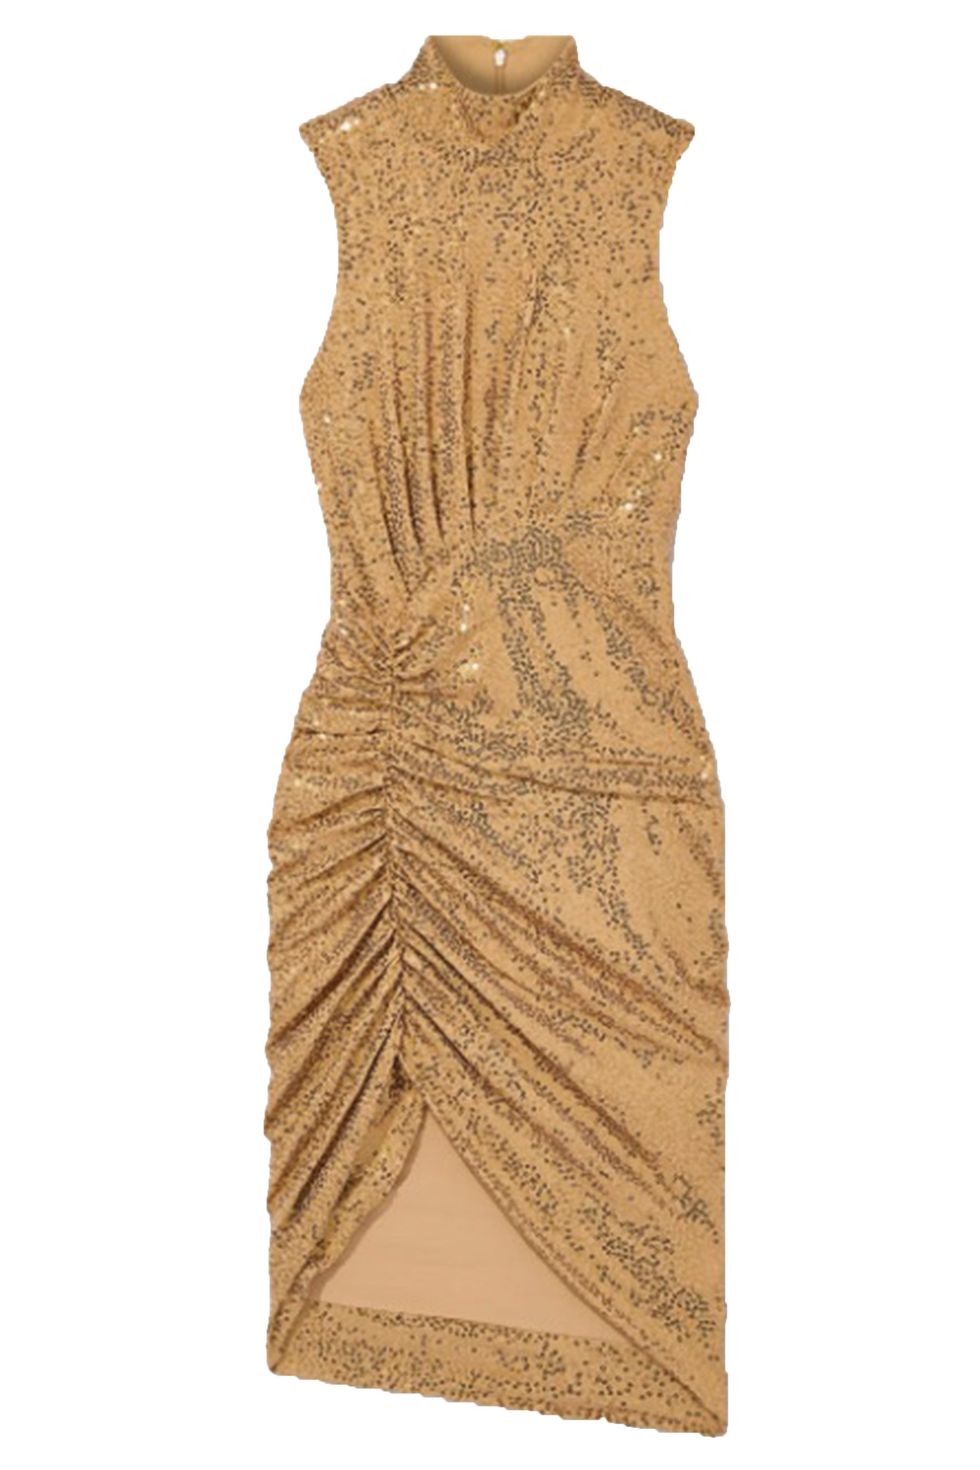 Michael Kors Collection sequinned dress